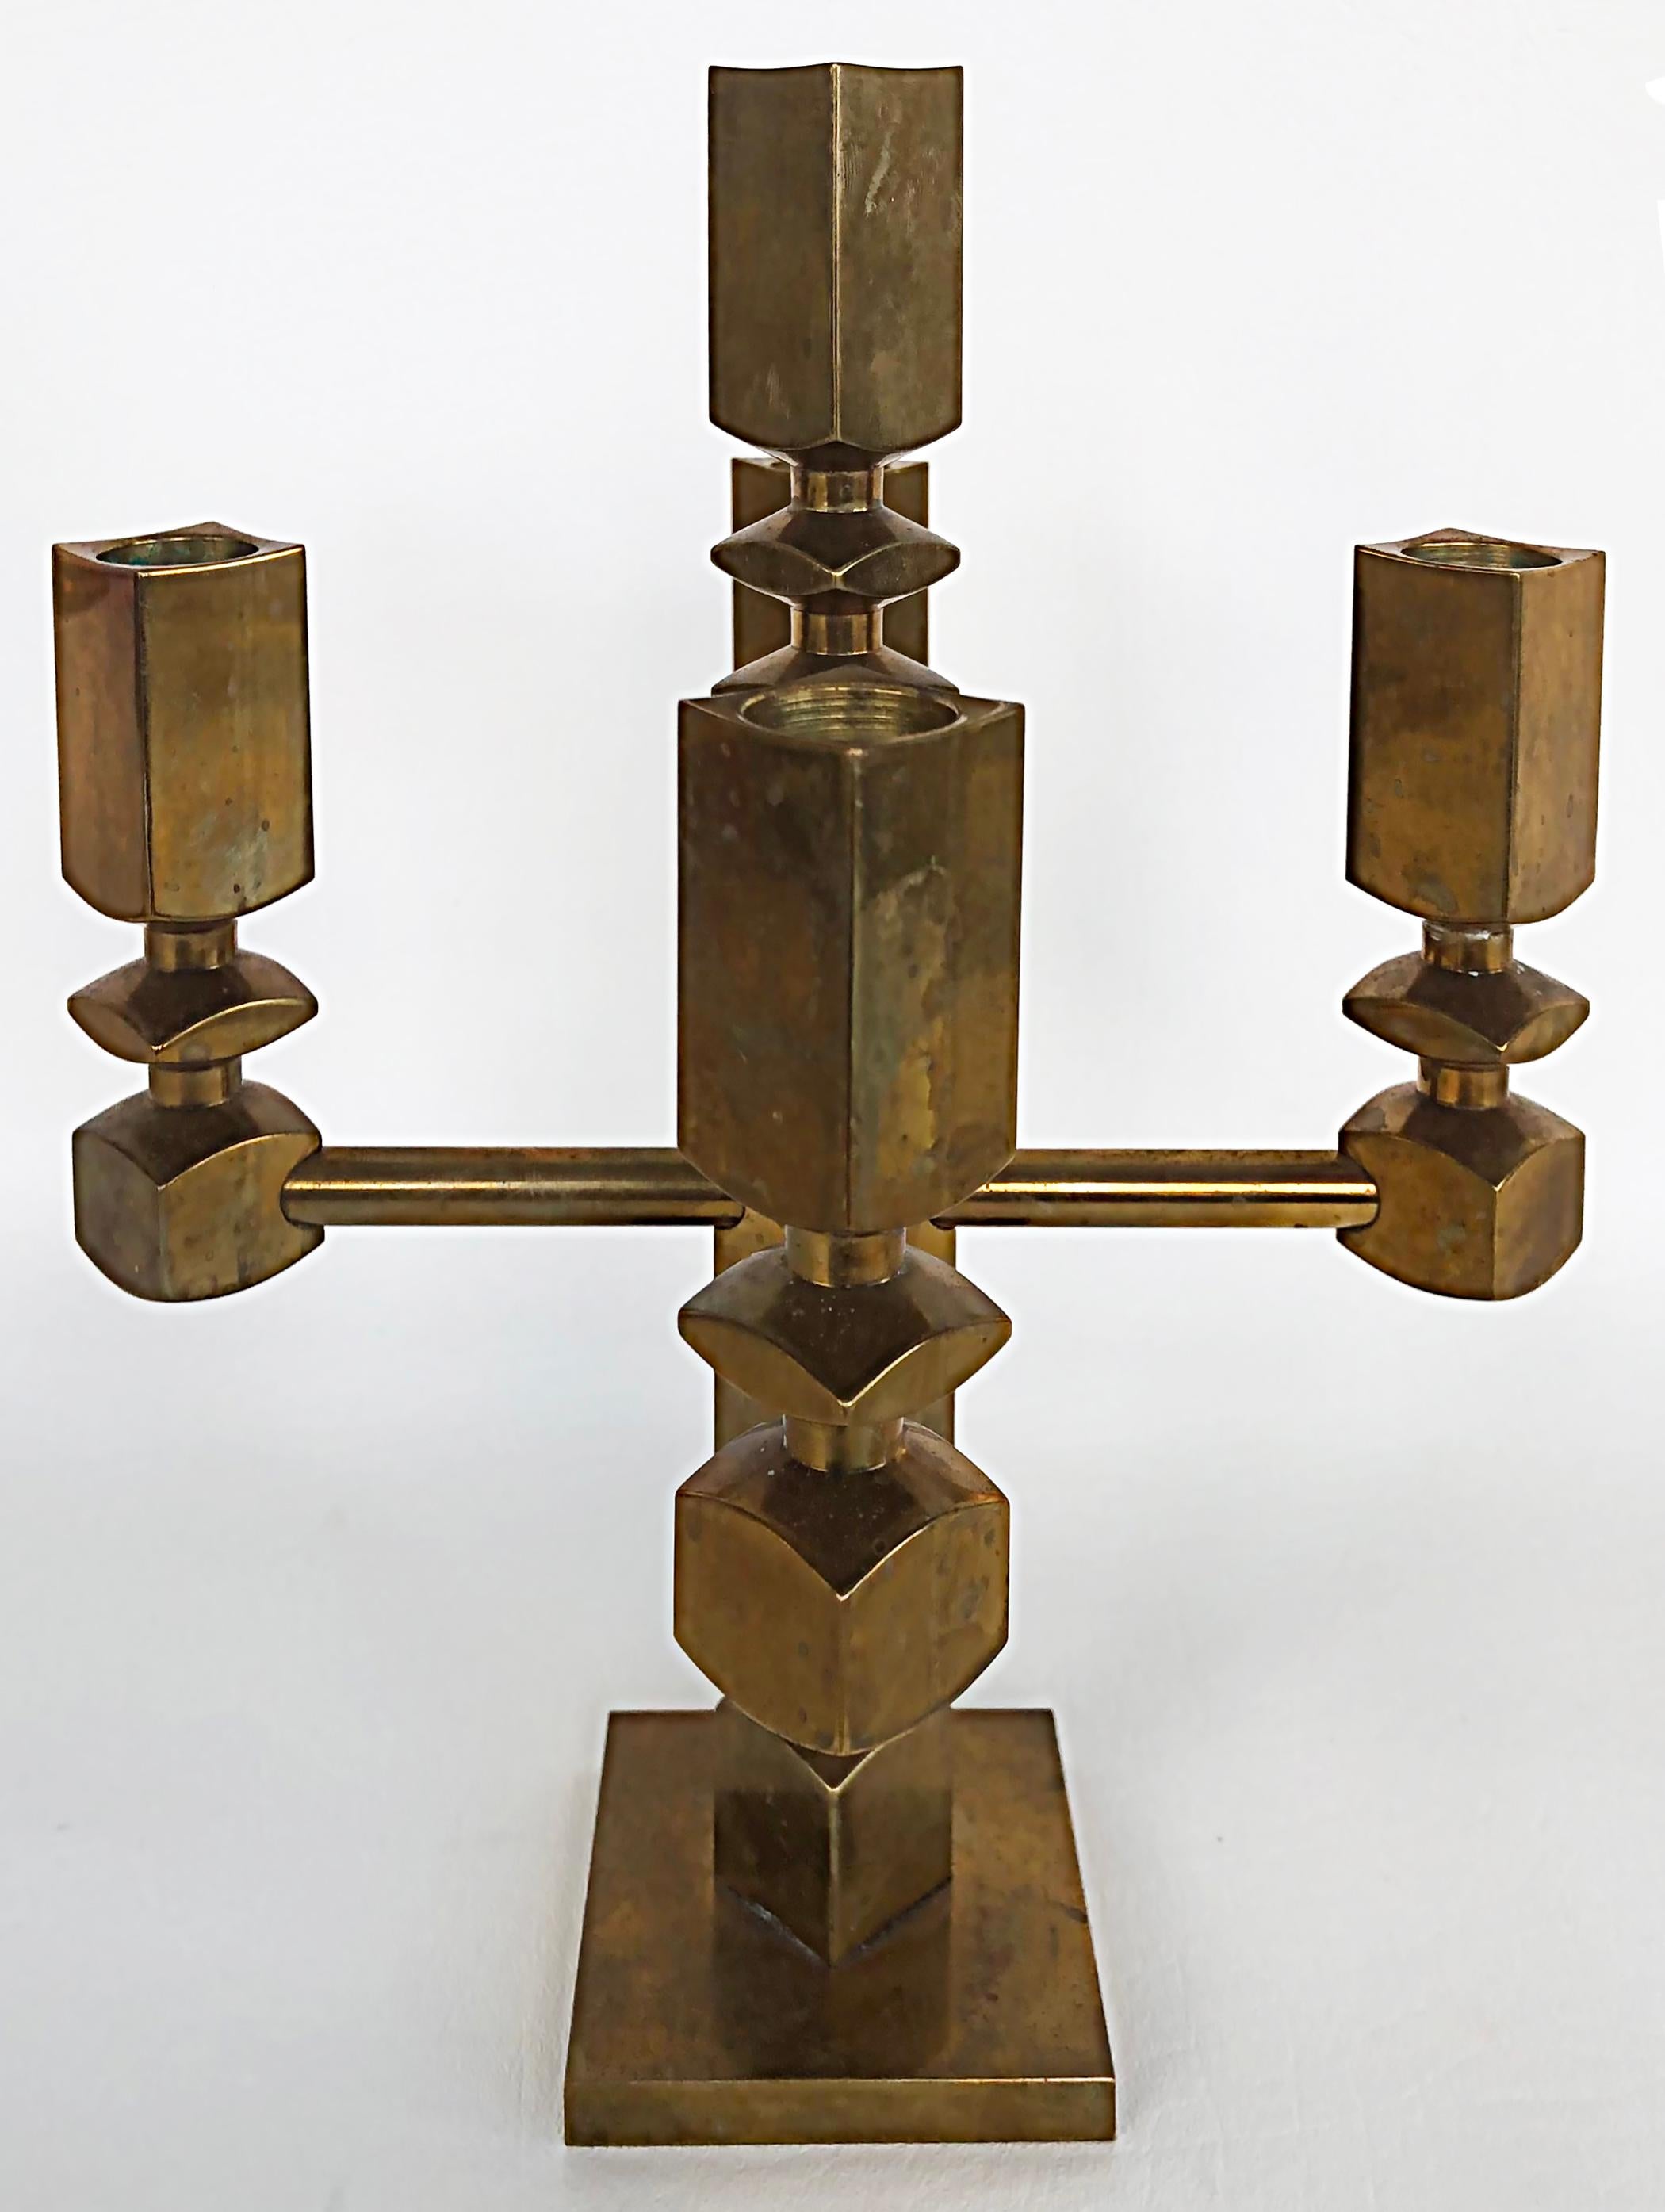 Vallonmässing, Sweden Lars Bergsten brass Candelabra, 1985 

Offered for sale is a Swedish mid-century candelabra designed by Lars Bergsten. The candelabra accepts 5 candles and is marked and dated 1985 underneath the base as shown. It is a rare,